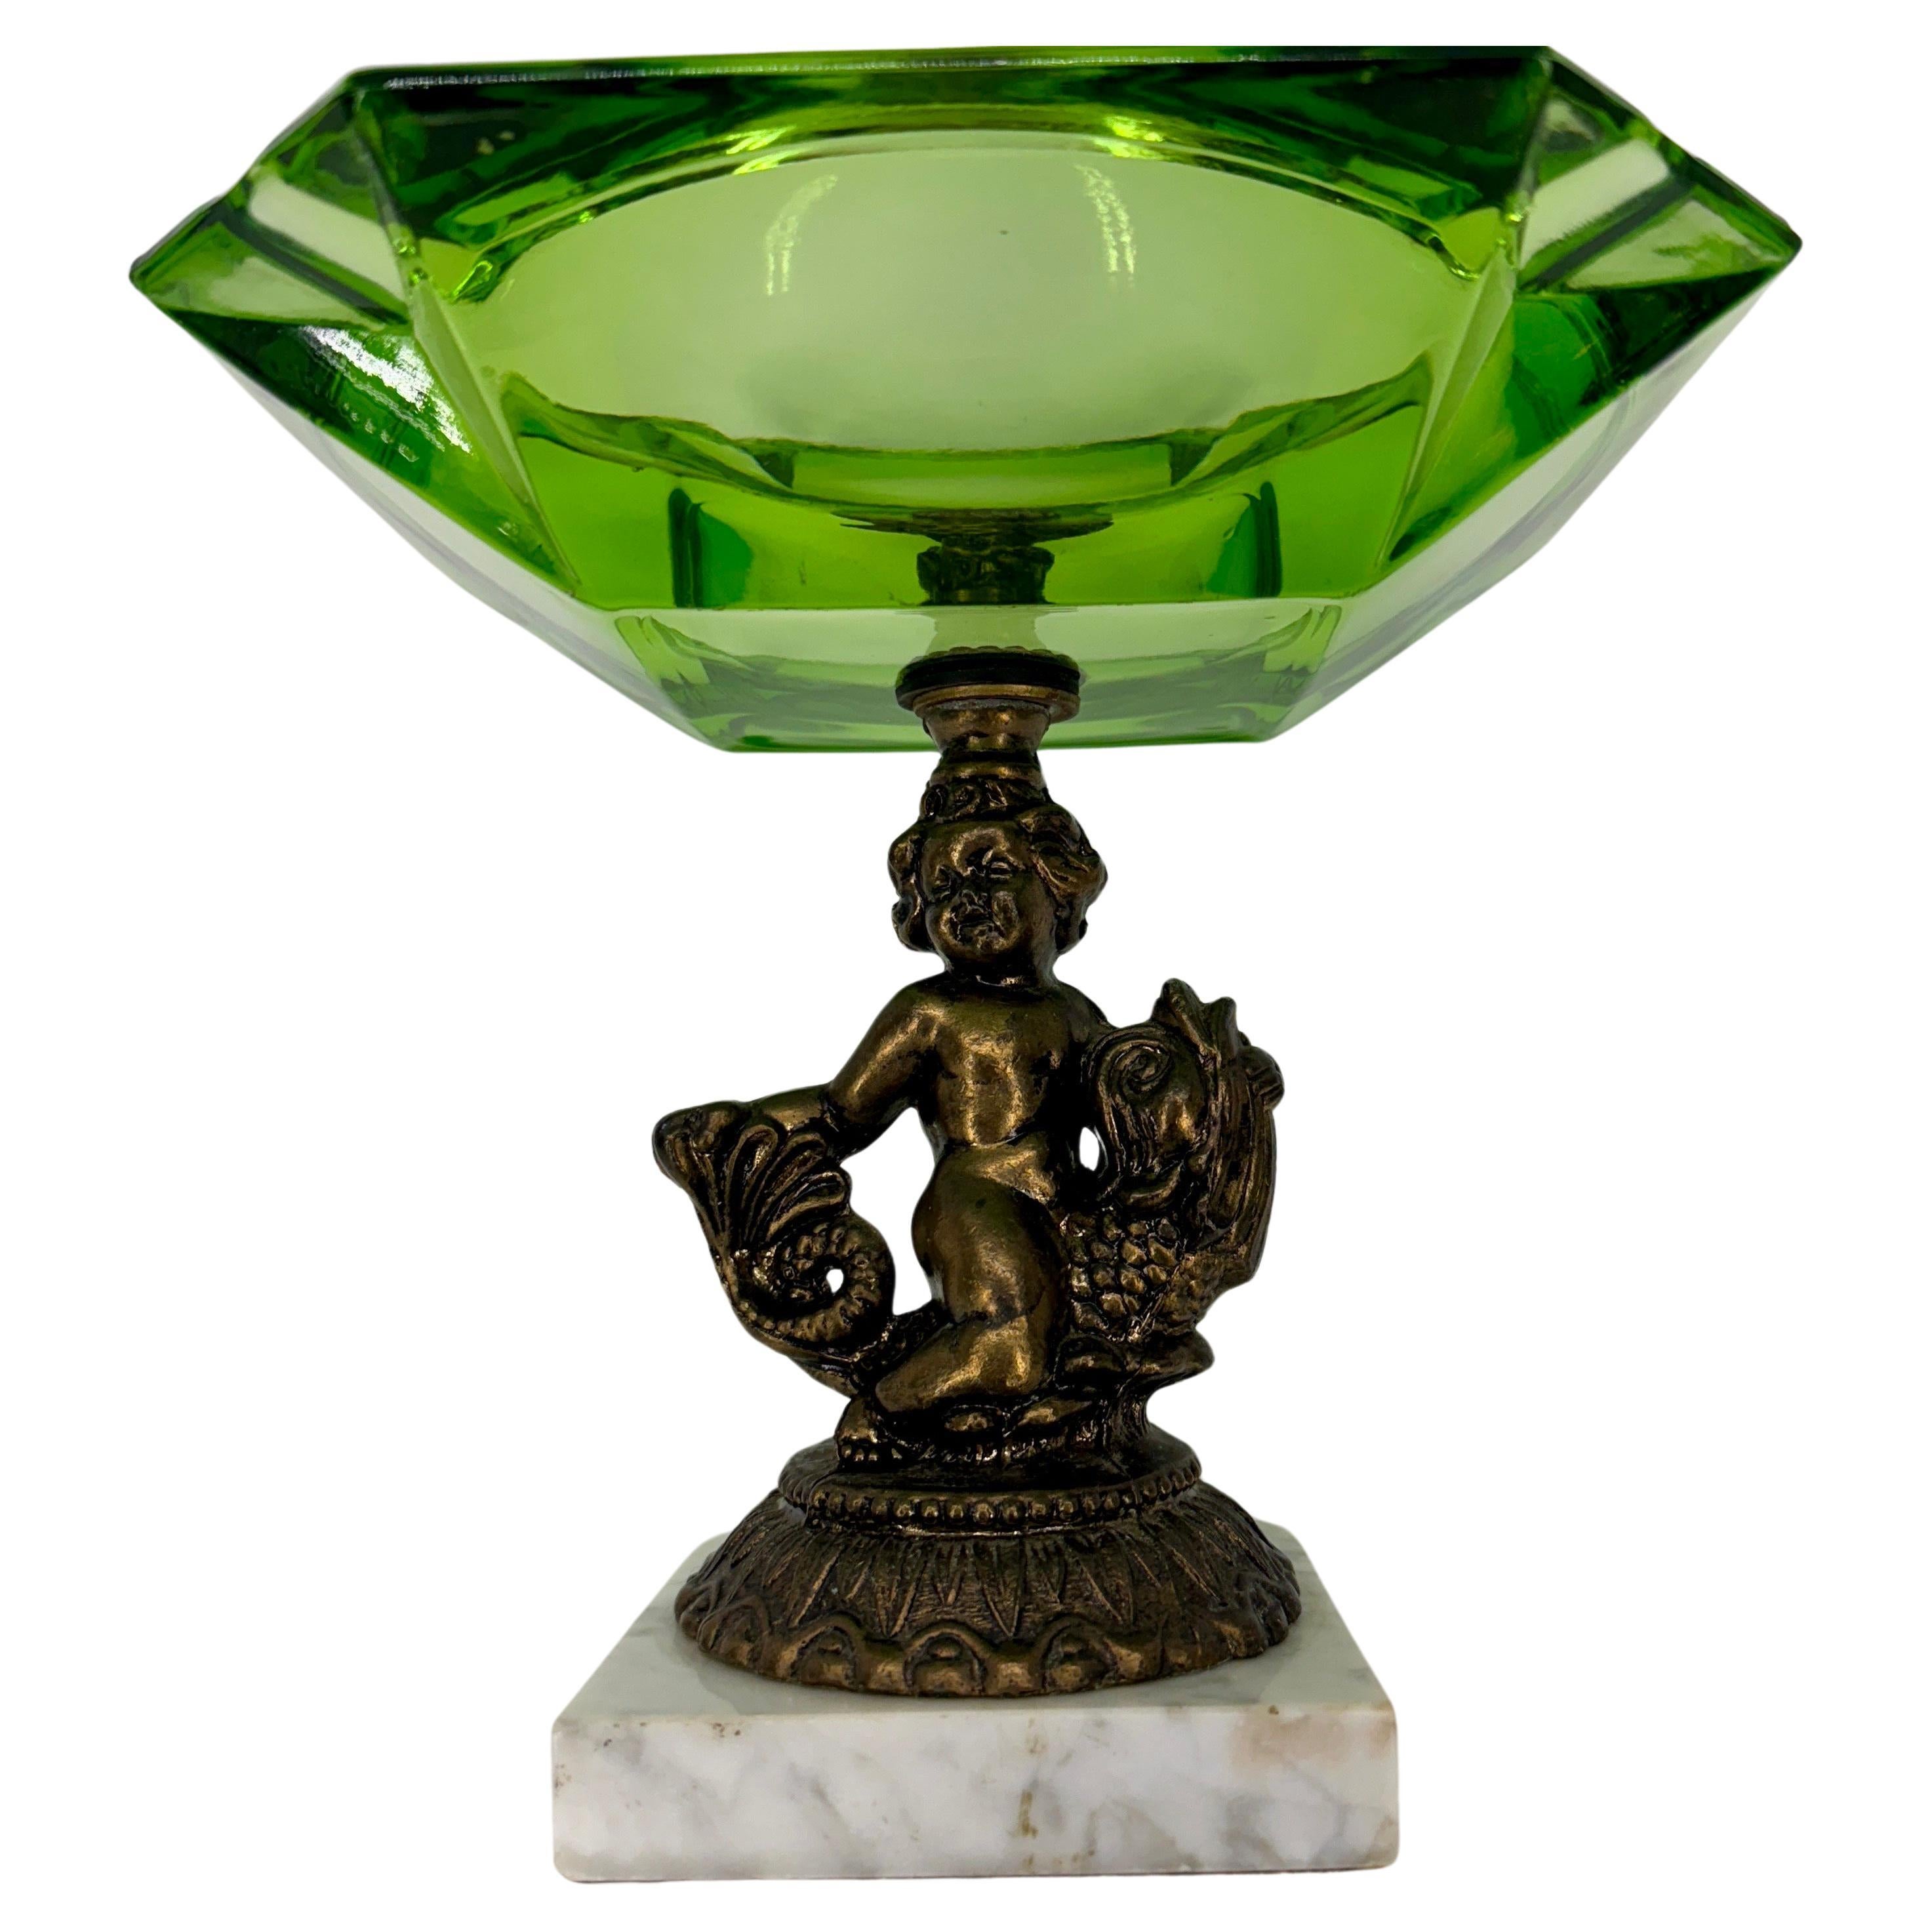 Hand-Crafted Large Green Glass Putti Bronze Marble Base Cigar Ashtray